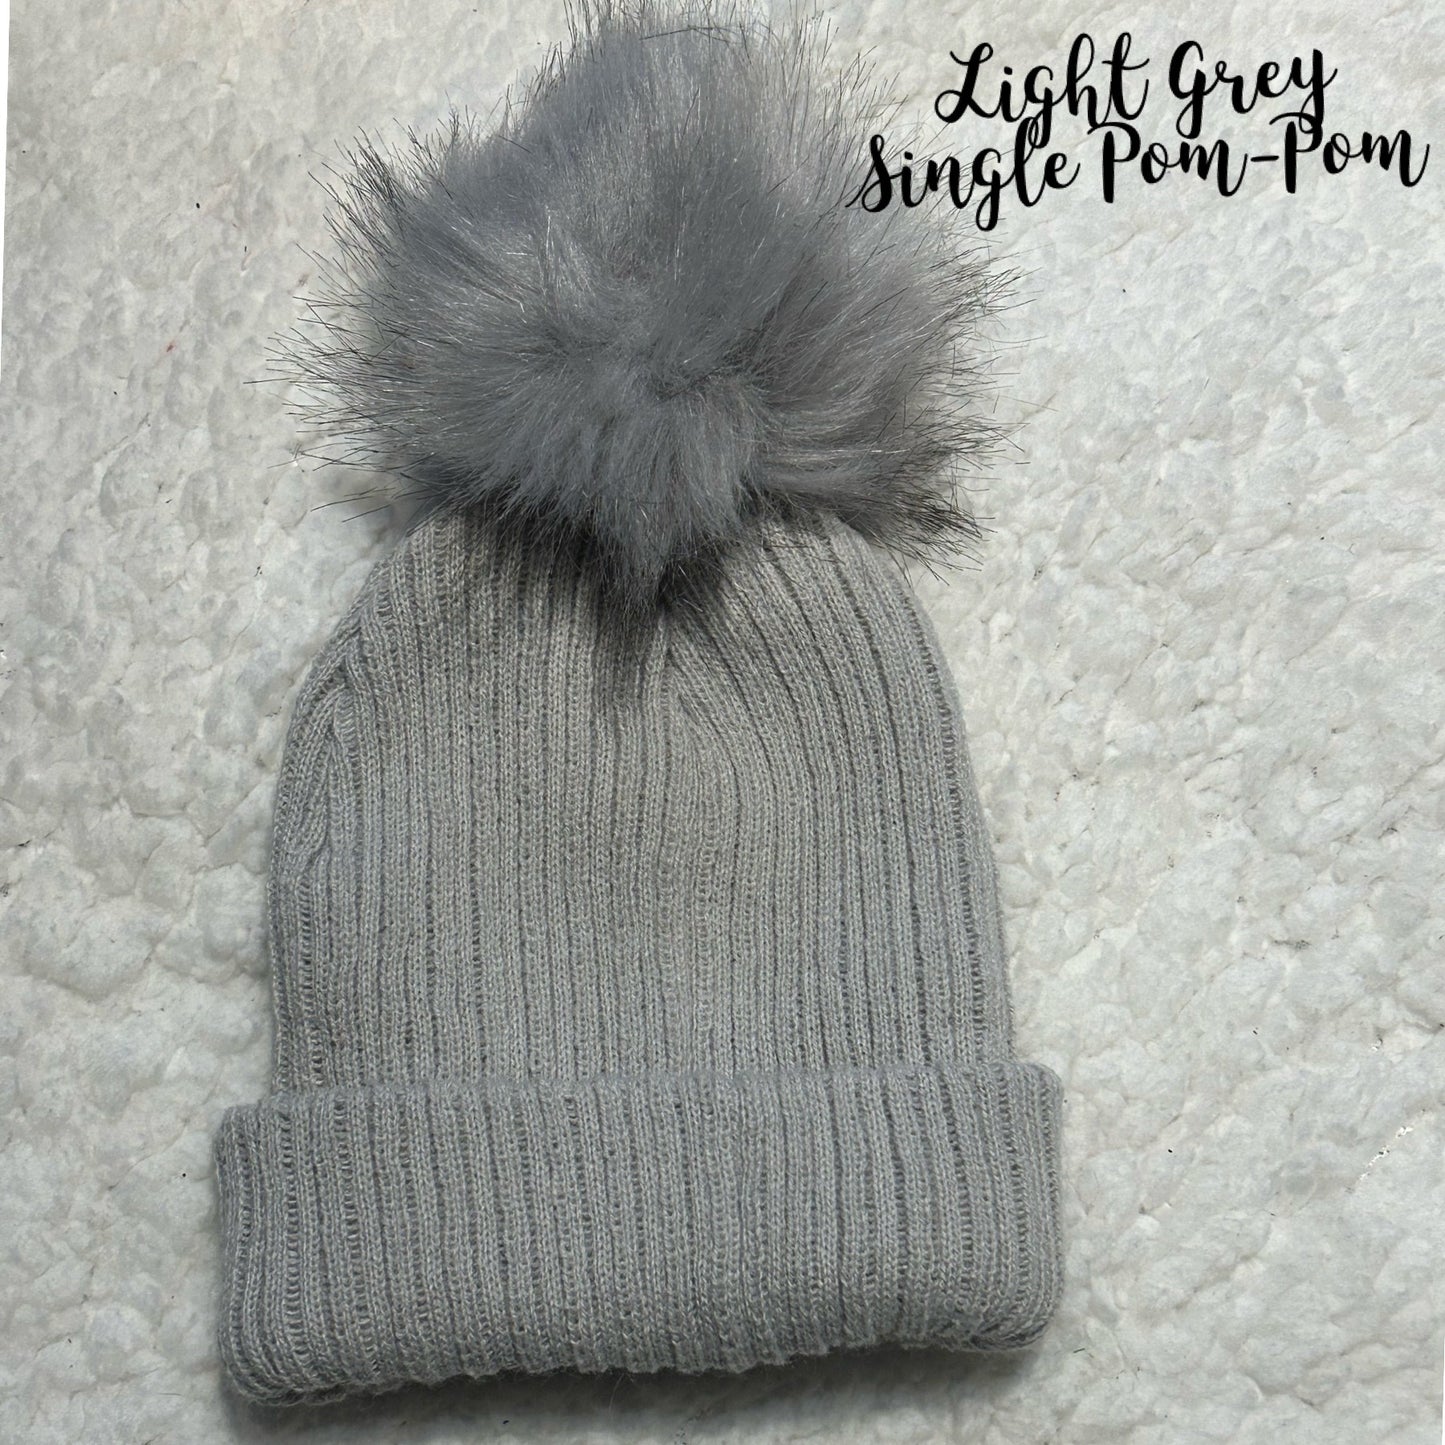 Single Pom-Pom hats (With personalised name)